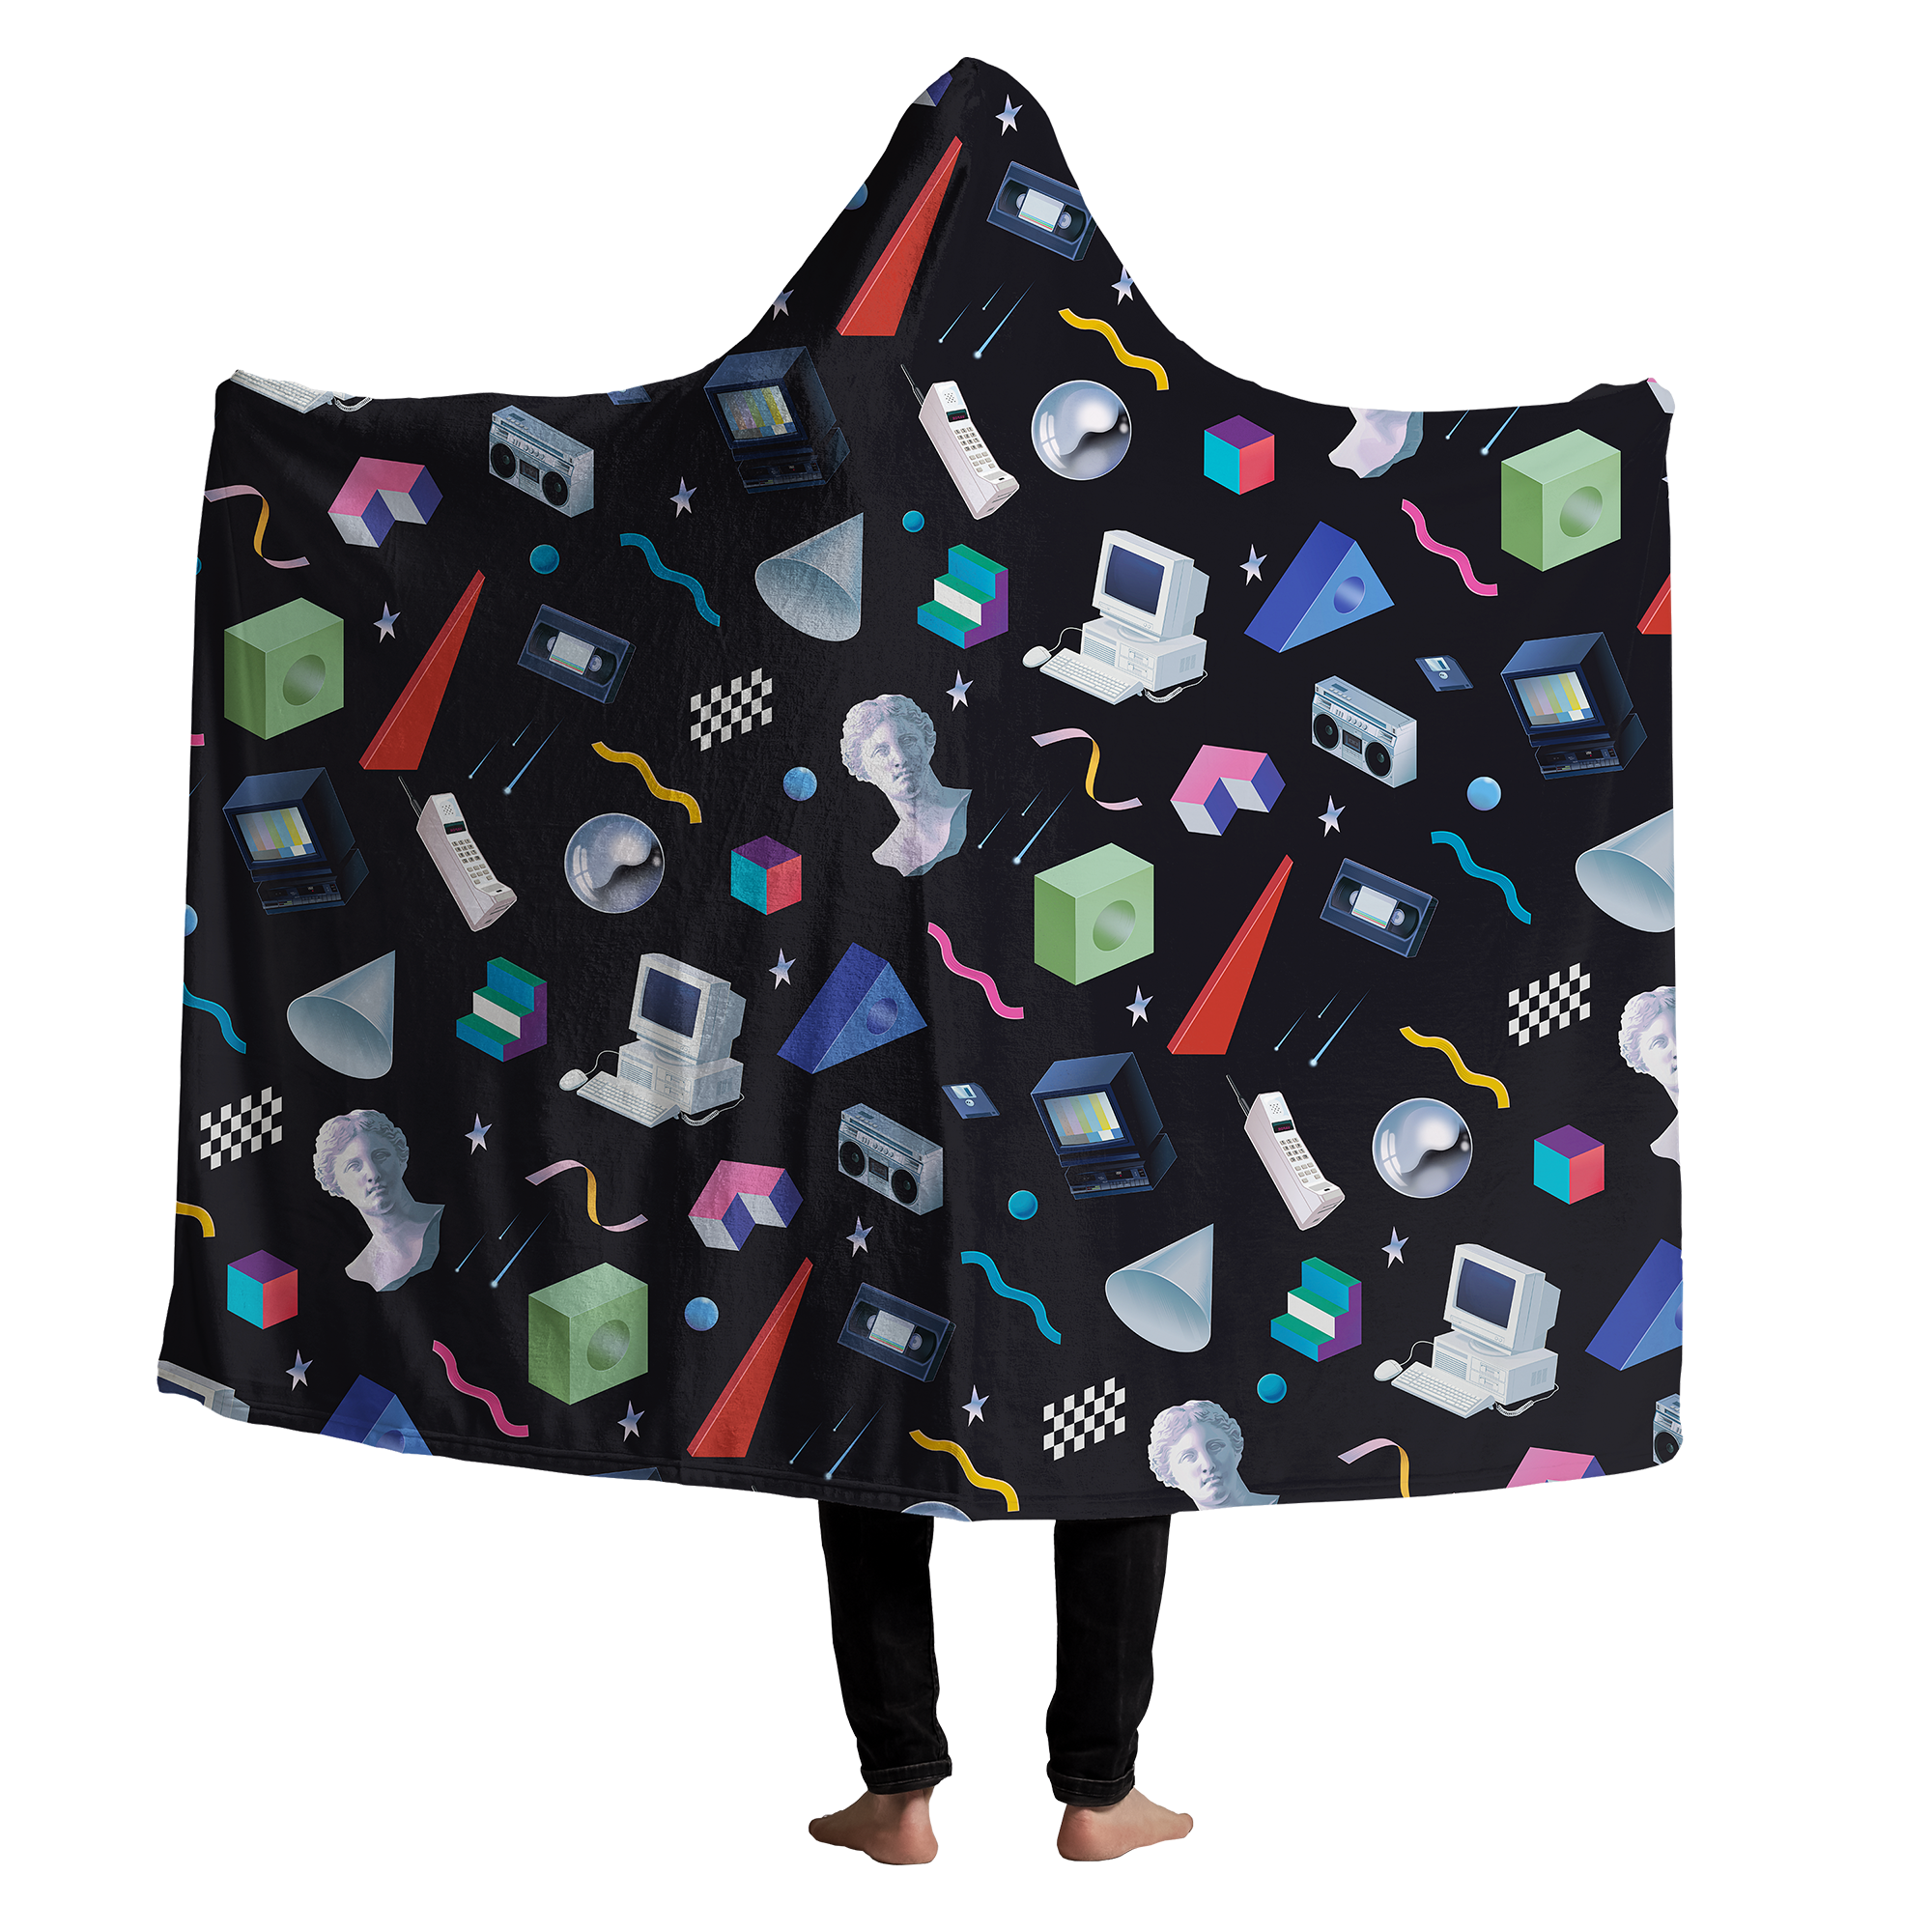 Shapes & Forms Hooded Blanket